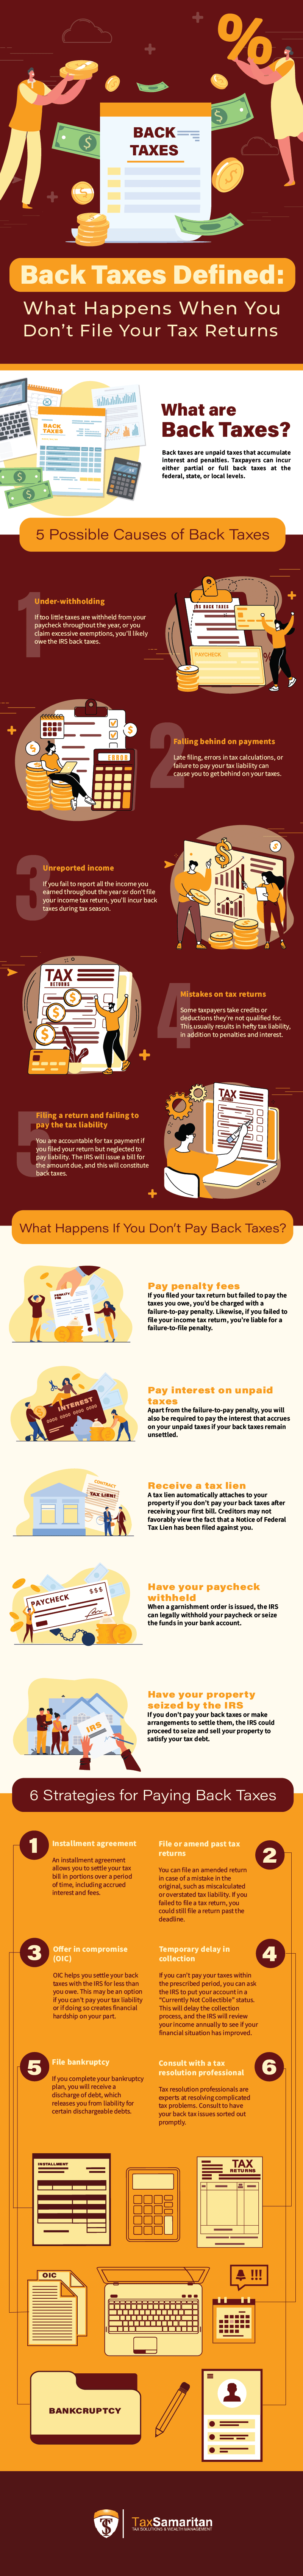 Back Taxes Defined: What Happens When You Don’t File Your Tax Returns